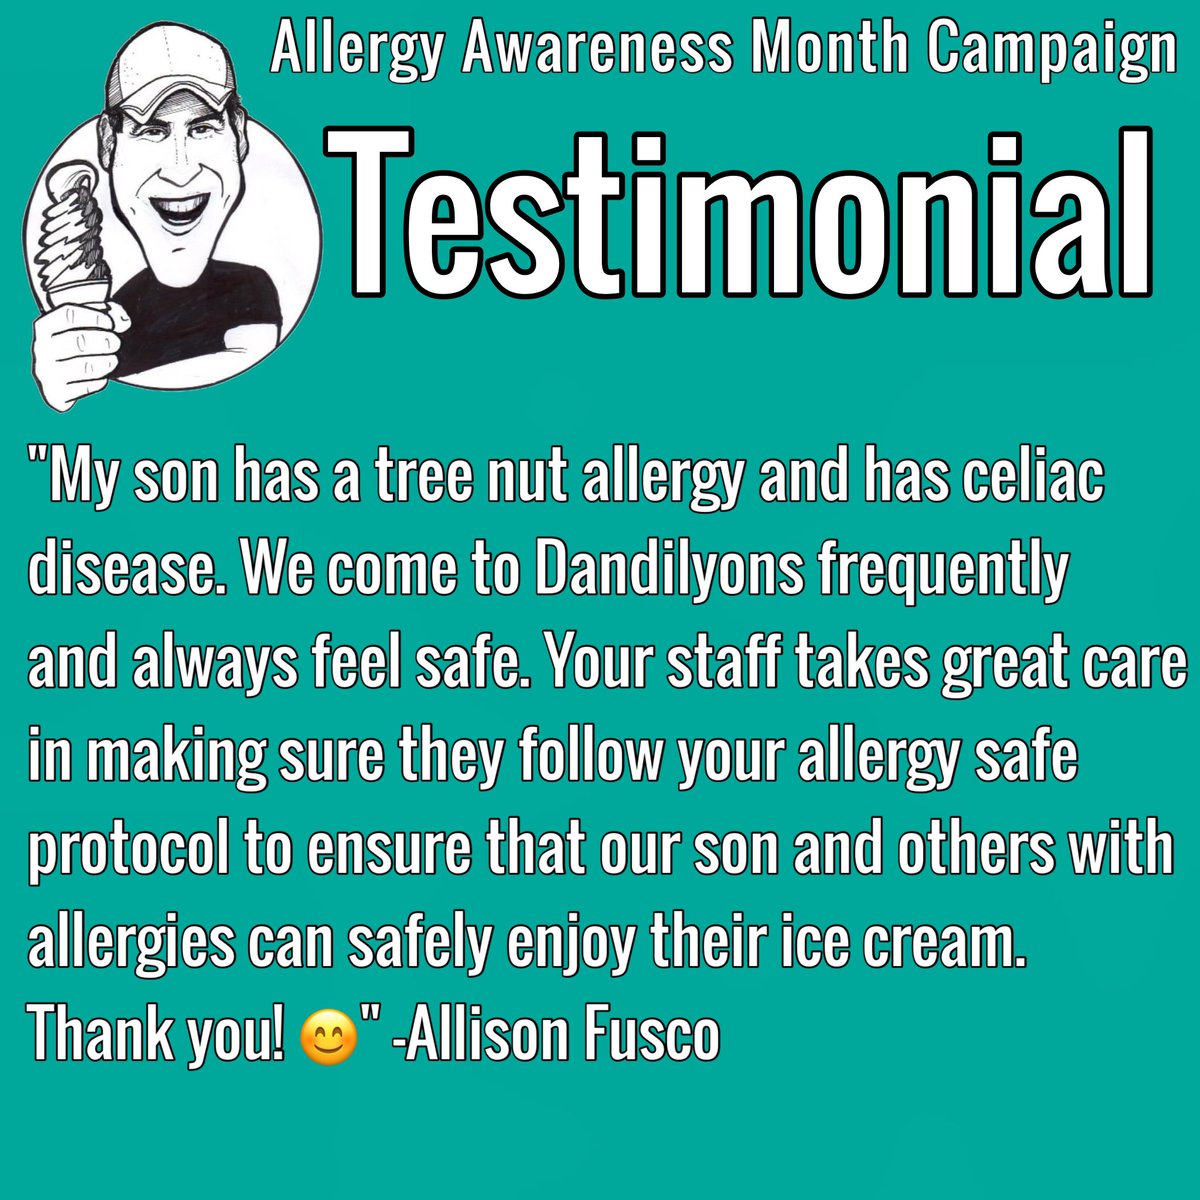 Our first testimonial of #AllergyAwarenessMonth, thank you for the kind words Allison!